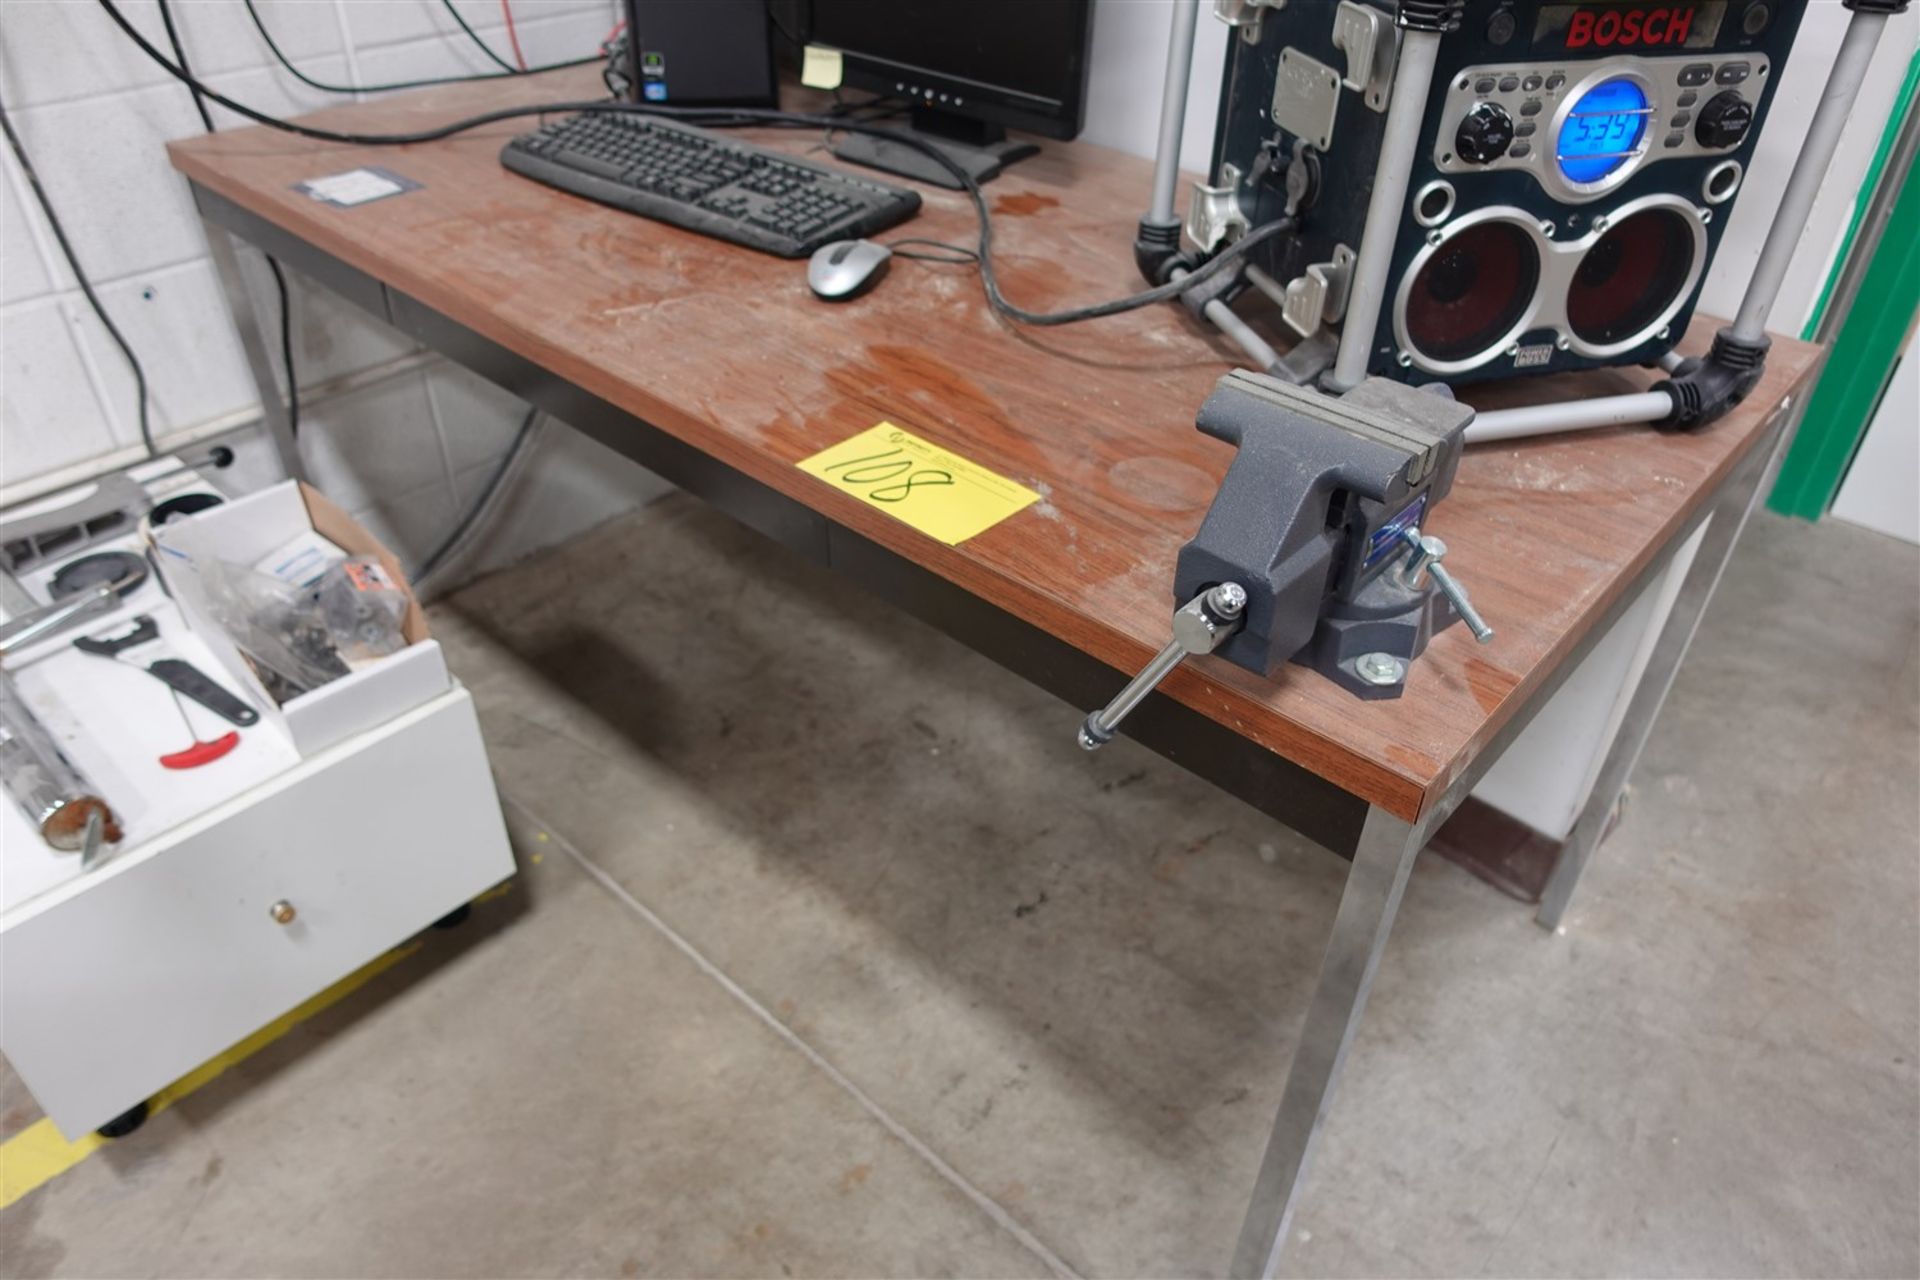 TABLE W/ POWER FIST BENCH VISE